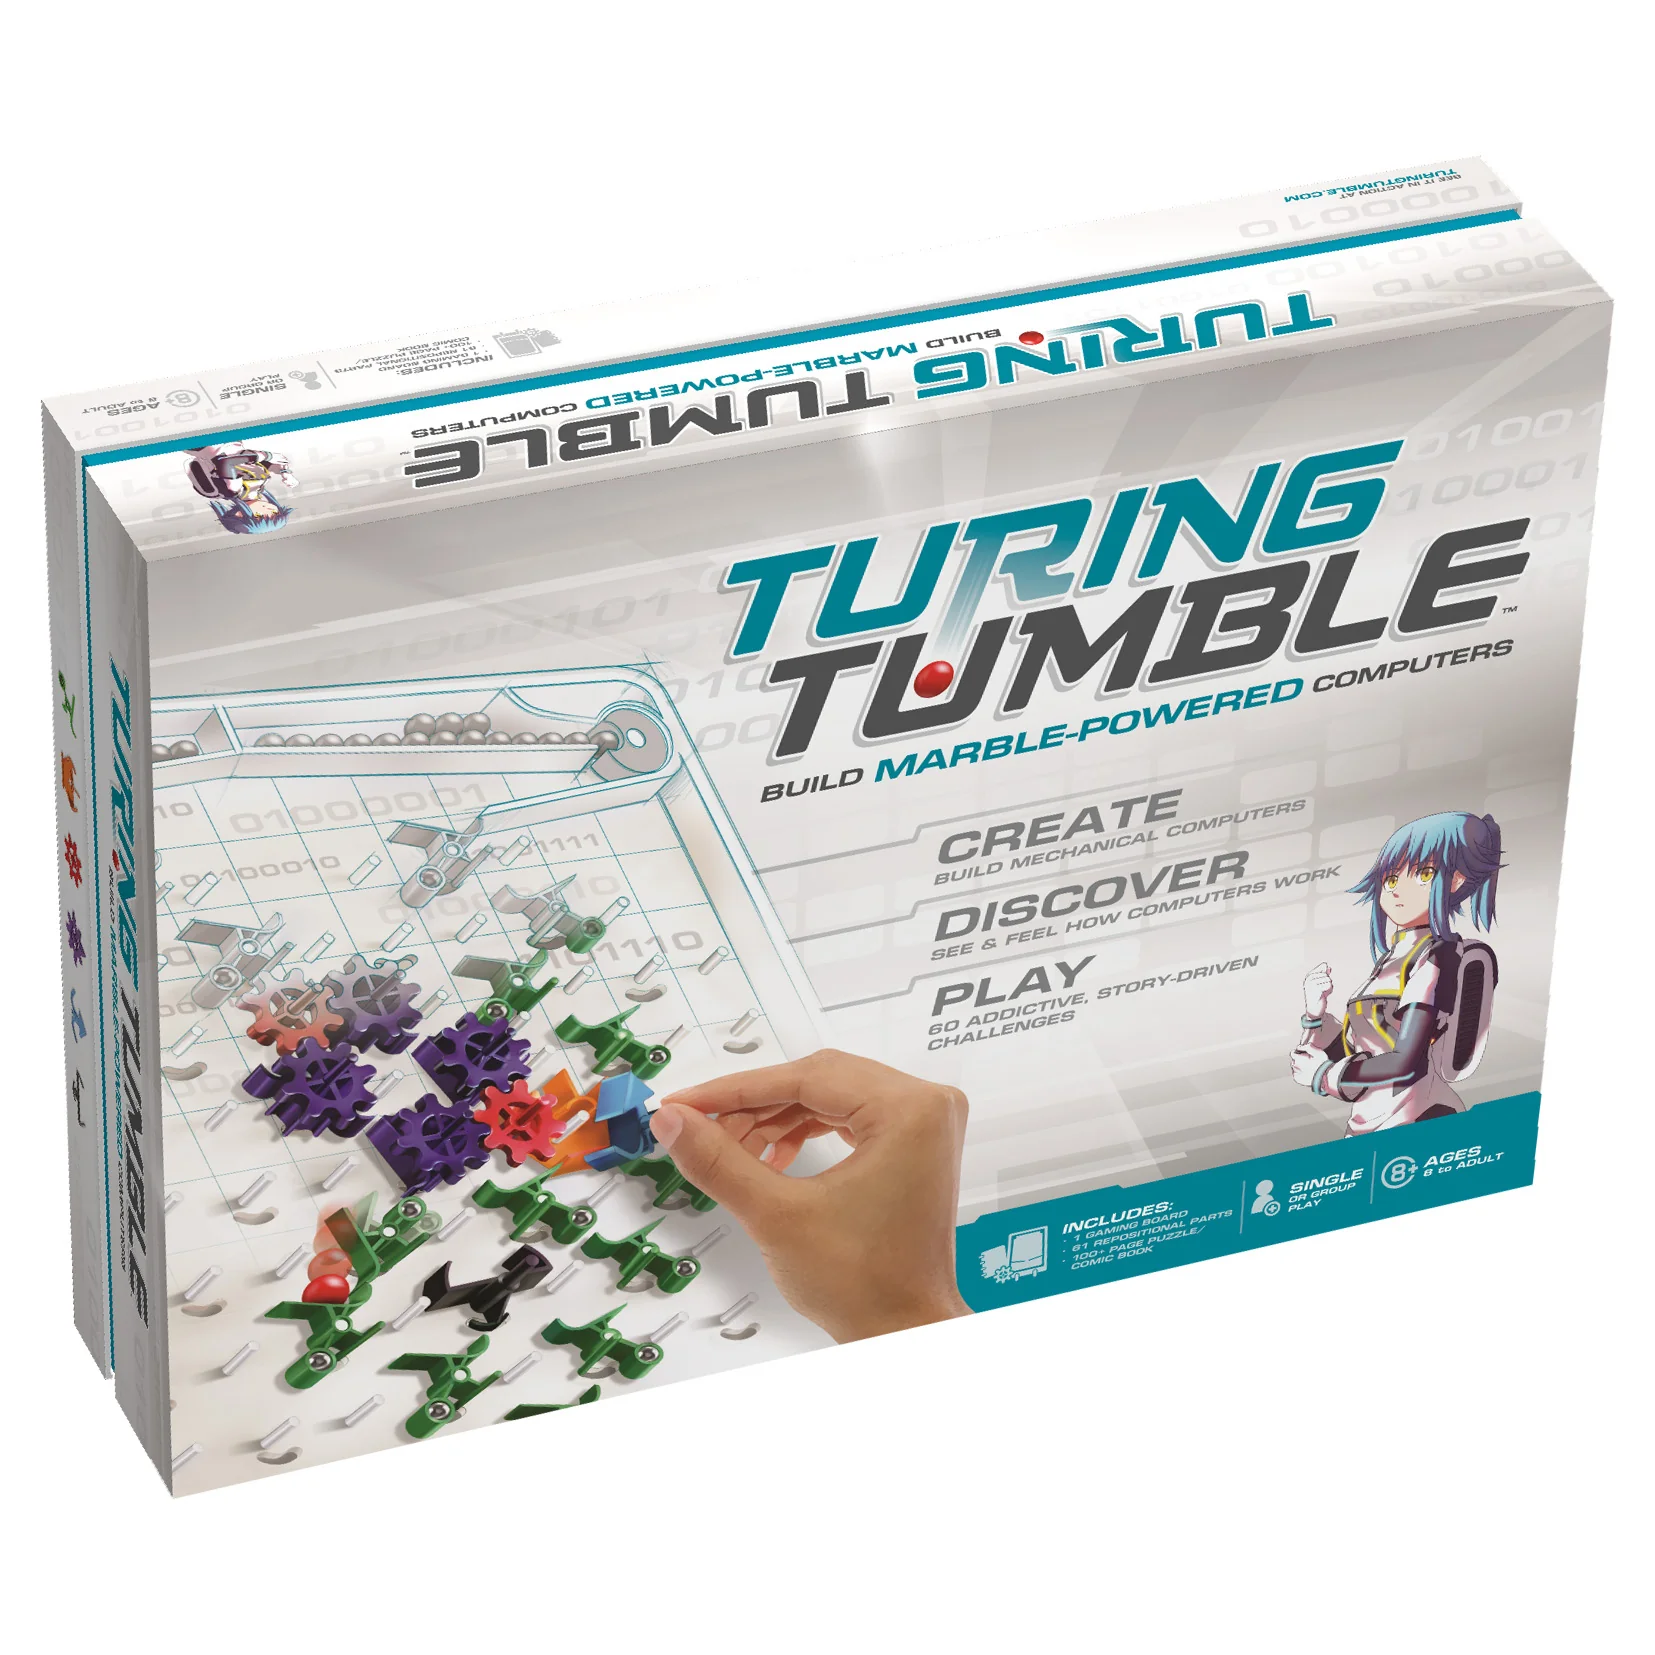 Turing Tumble Simulator Review for Teachers